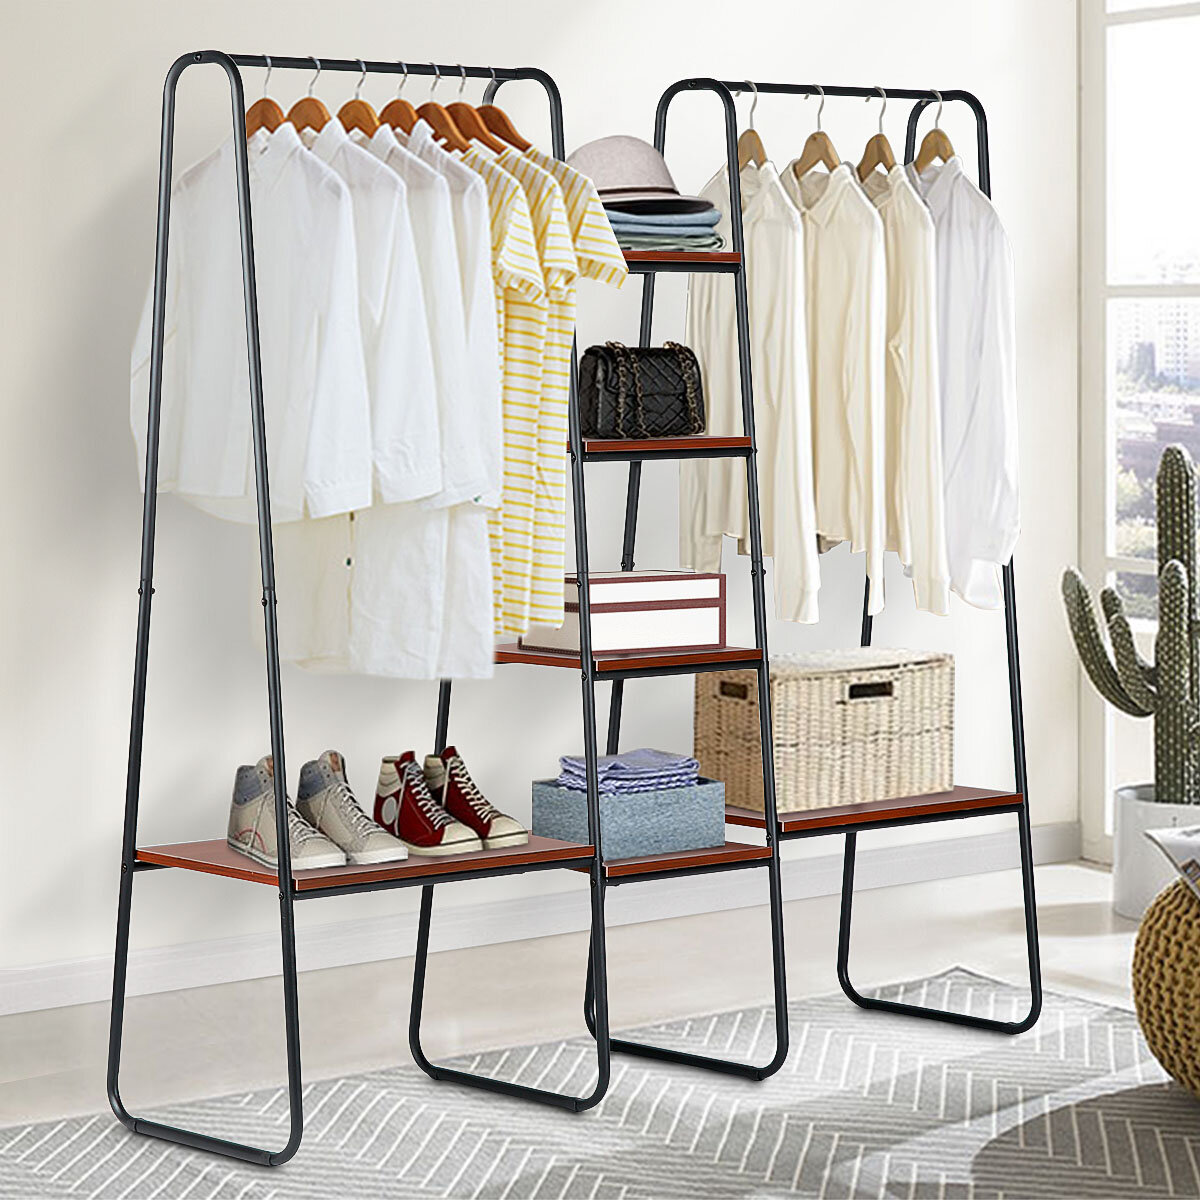 

Lusimo Metal Clothes Rack with Wood Shelves Heavy Duty Garment Rack for Clothing Storage 5 Tiers Freestanding Wardrobe C